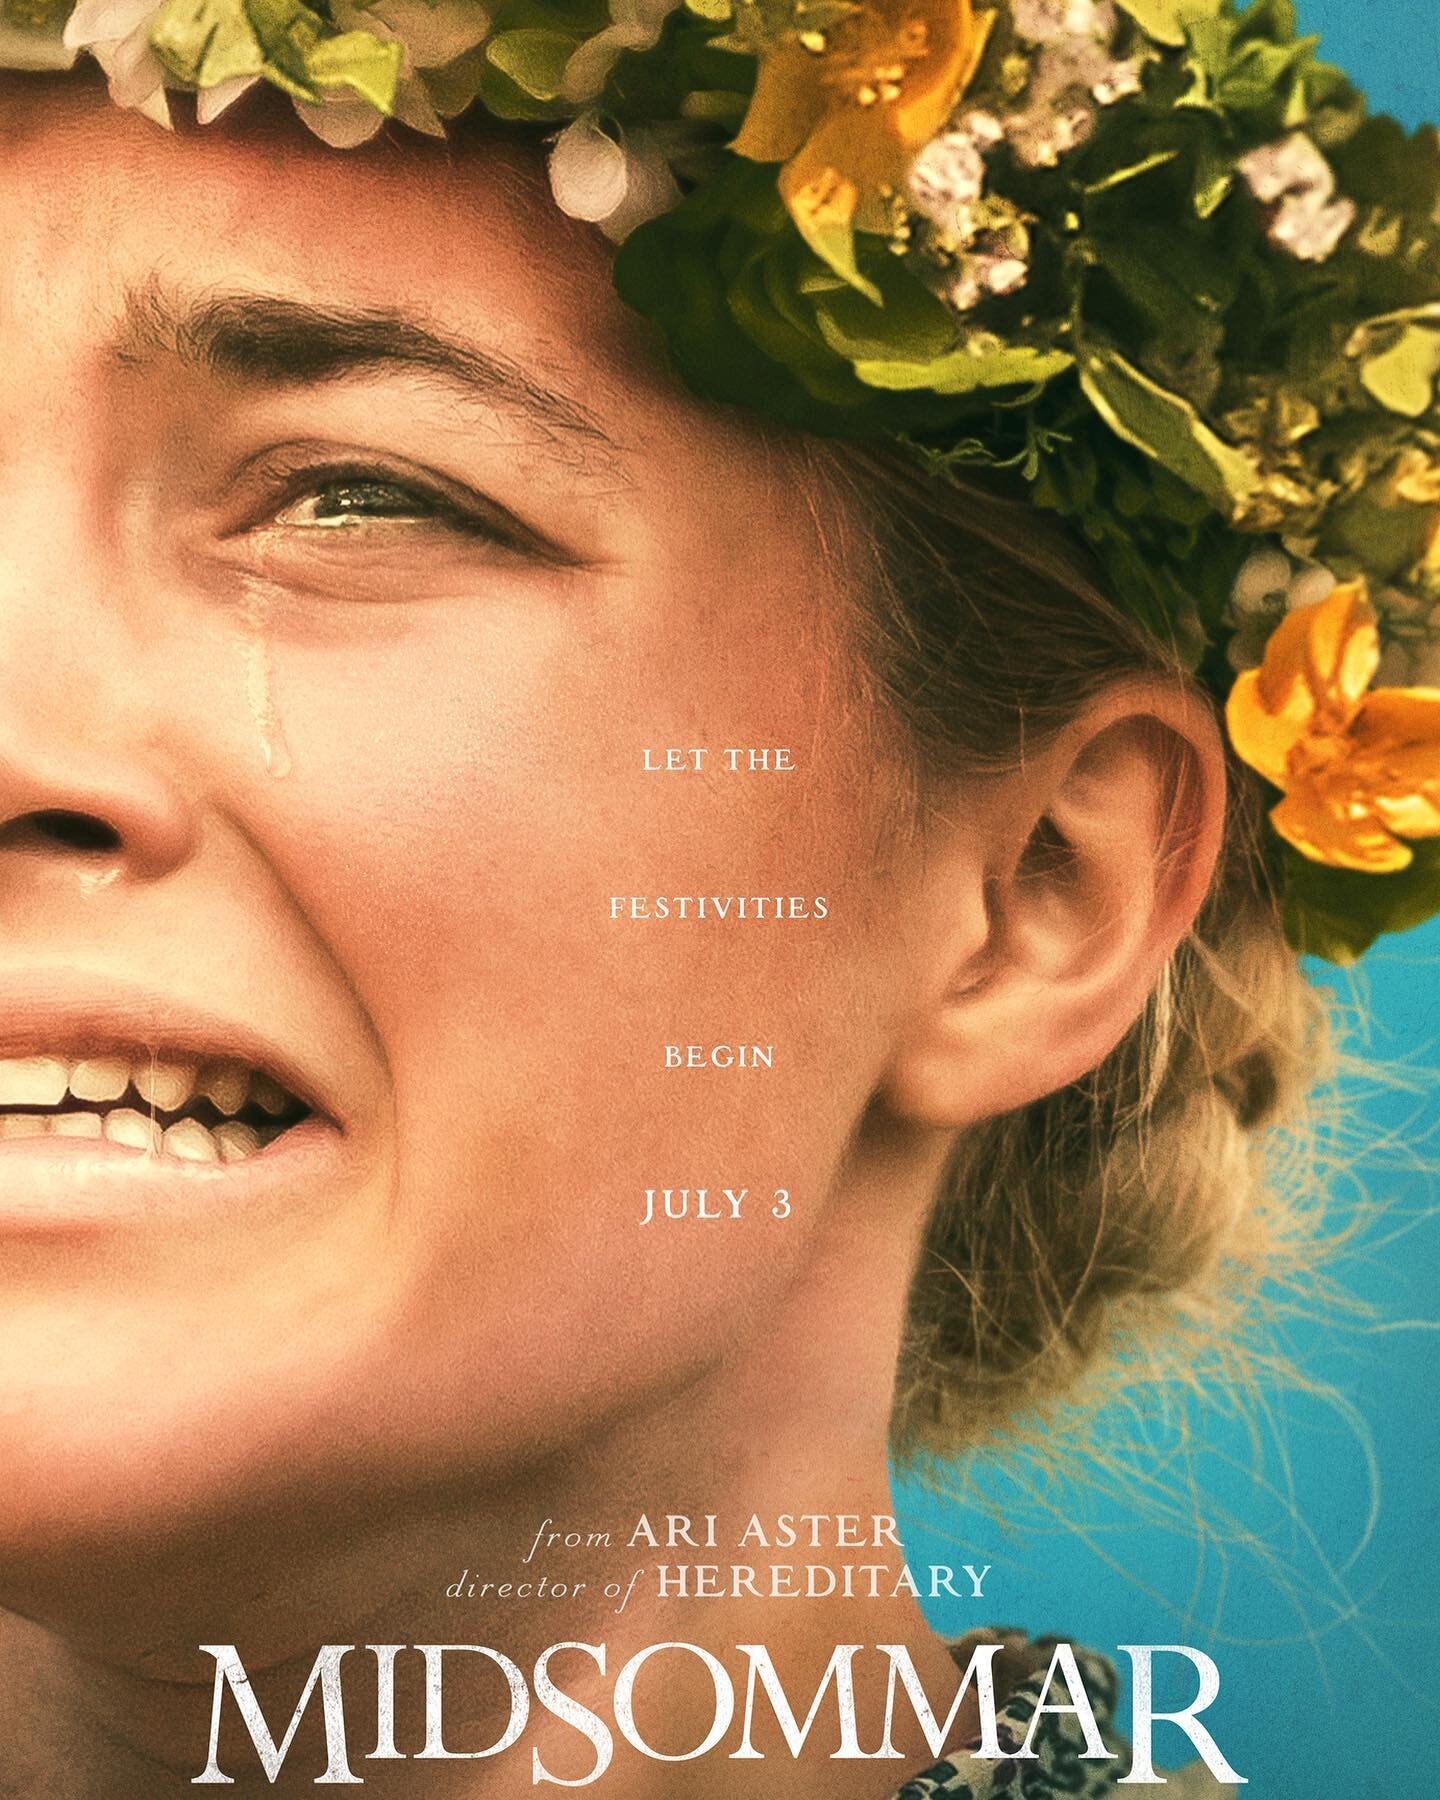 Our Midsommar ep is out! Head over to where you get your podcasts and give it a listen! 

ID the poster for Midsommar Florence Pugh a white blond woman with a flower crown cries. 

#midsommar #florencepugh #ariaster #horror #podcast #film #queer #que